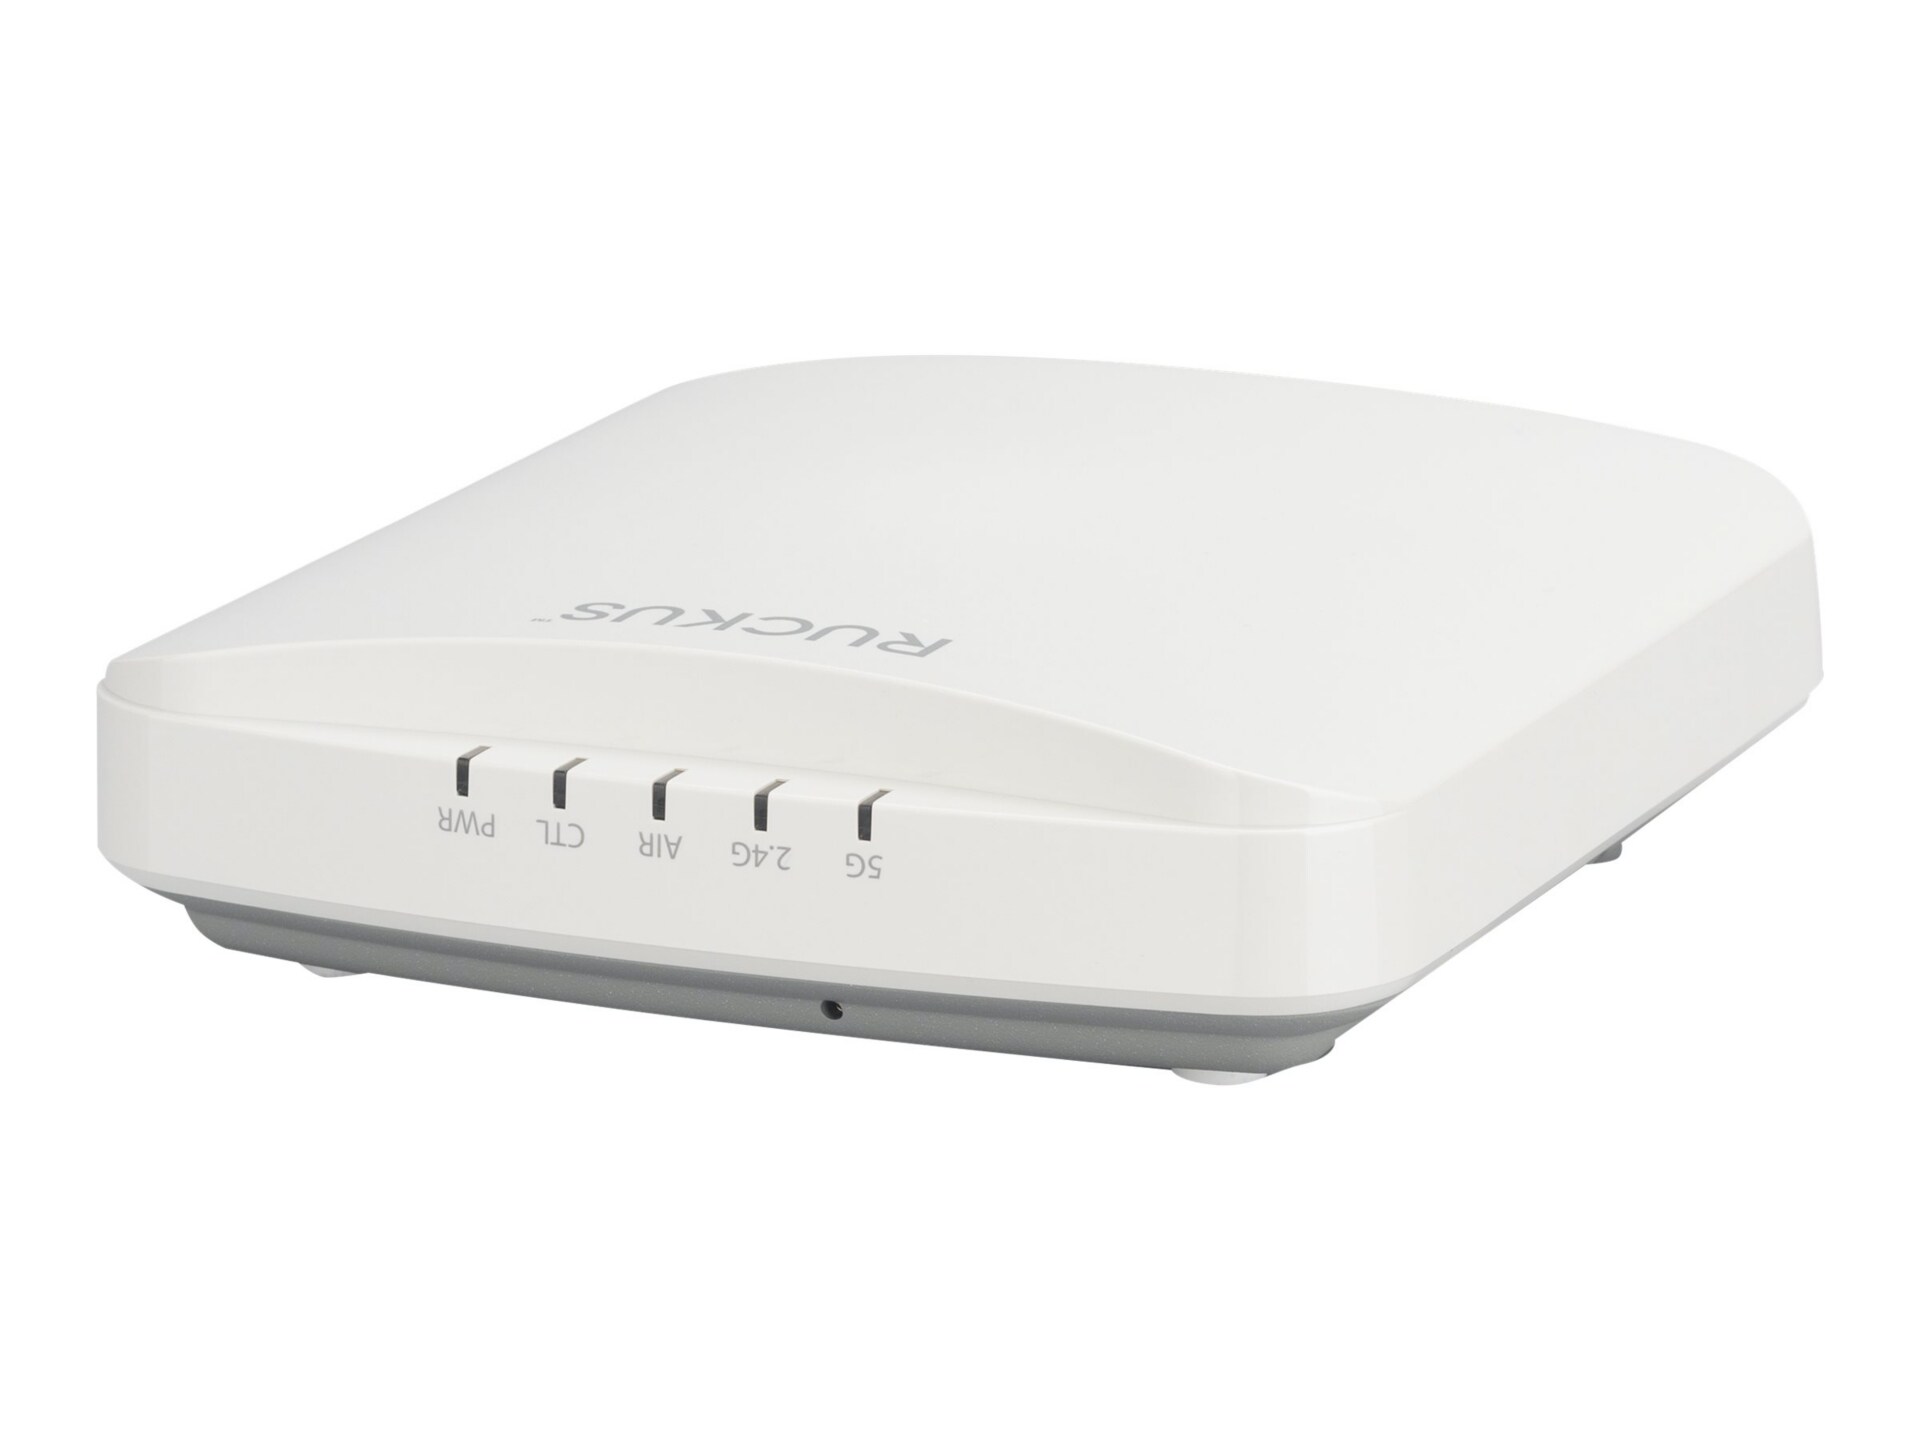 Ruckus R350 Unleashed - wireless access point - Wi-Fi 6